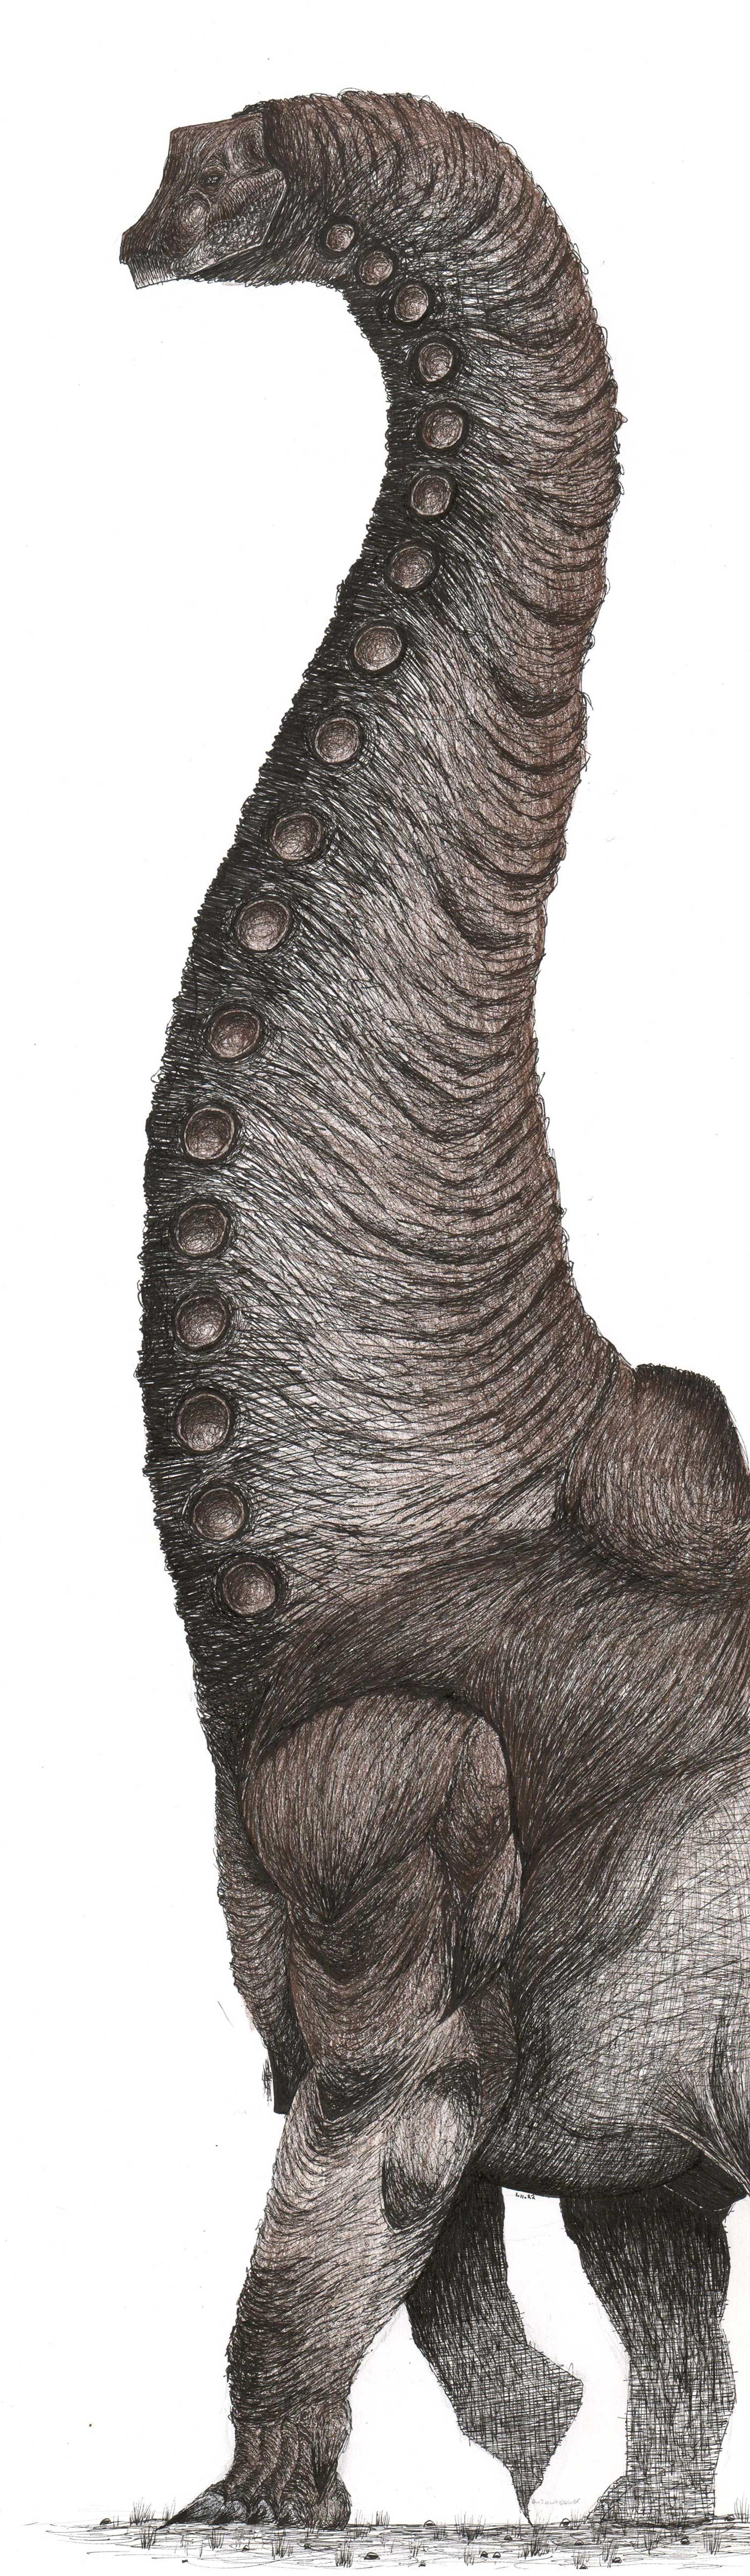 Pencil drawing of a long-necked dinosaur.